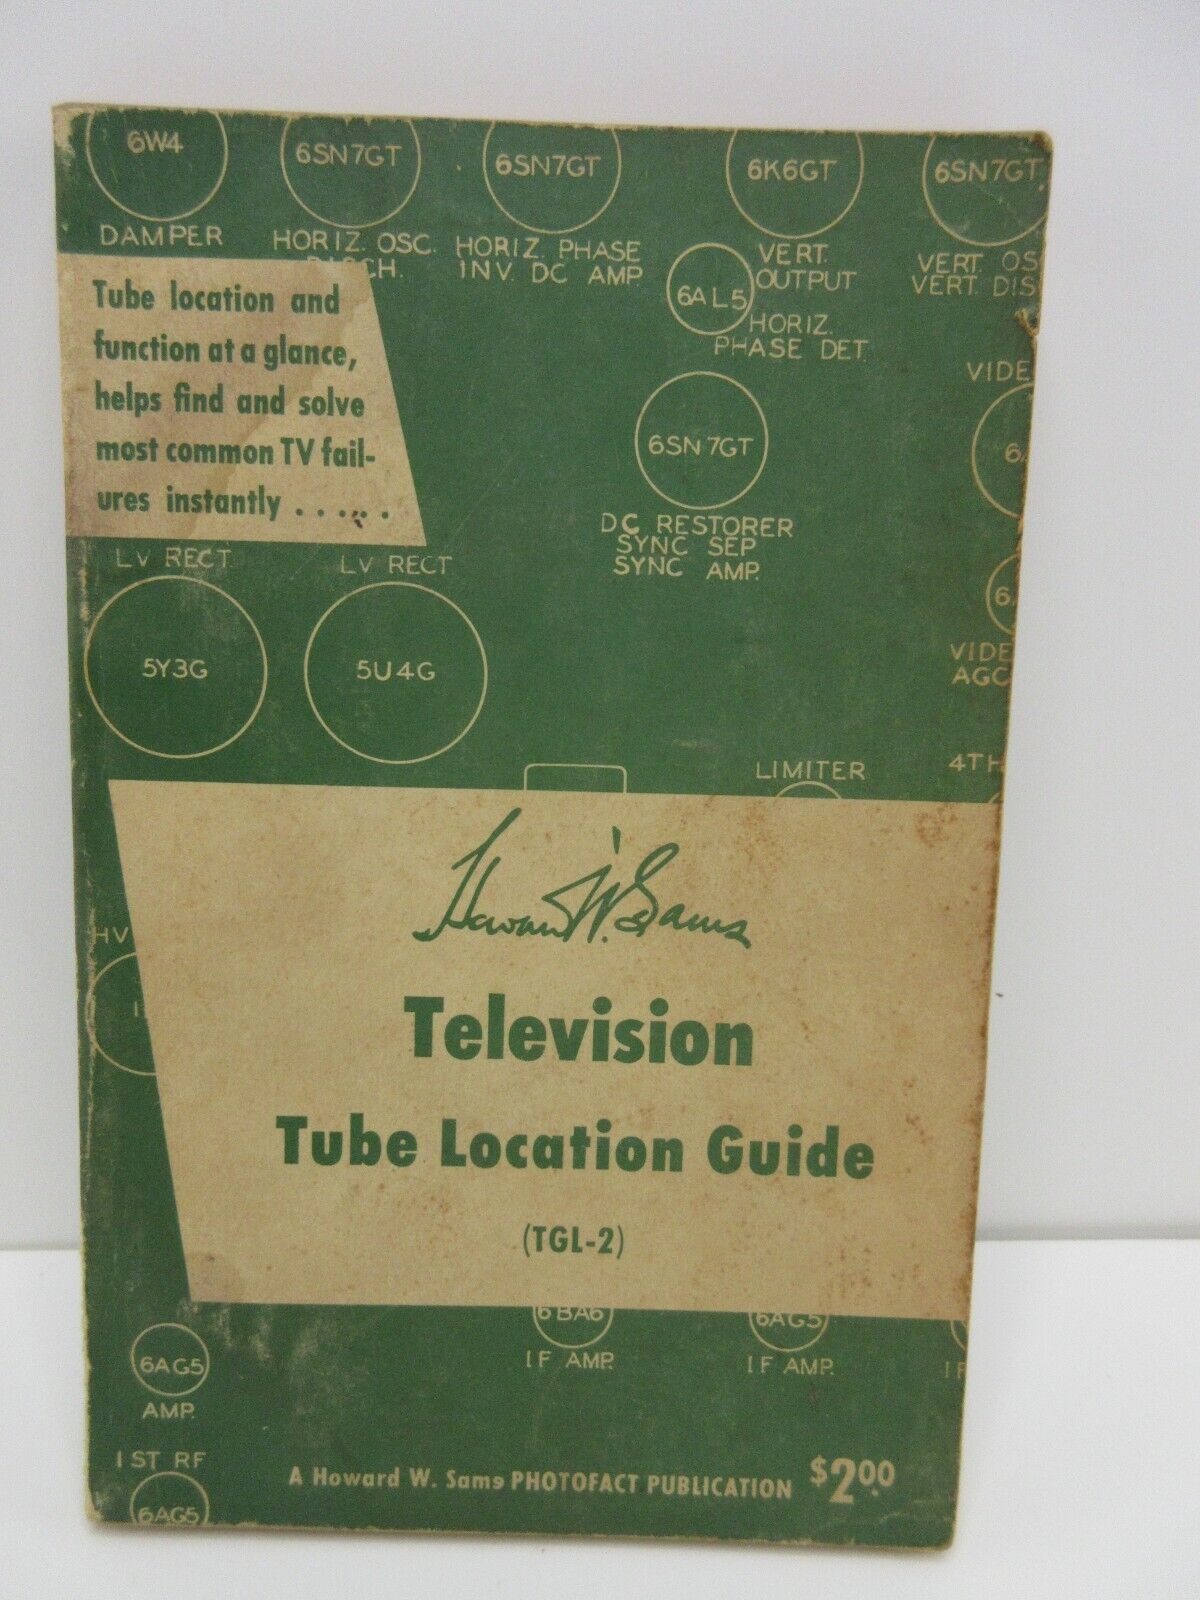 Vintage PHOTOFACT Television Tube Location Guide TGL-2 book from 1952